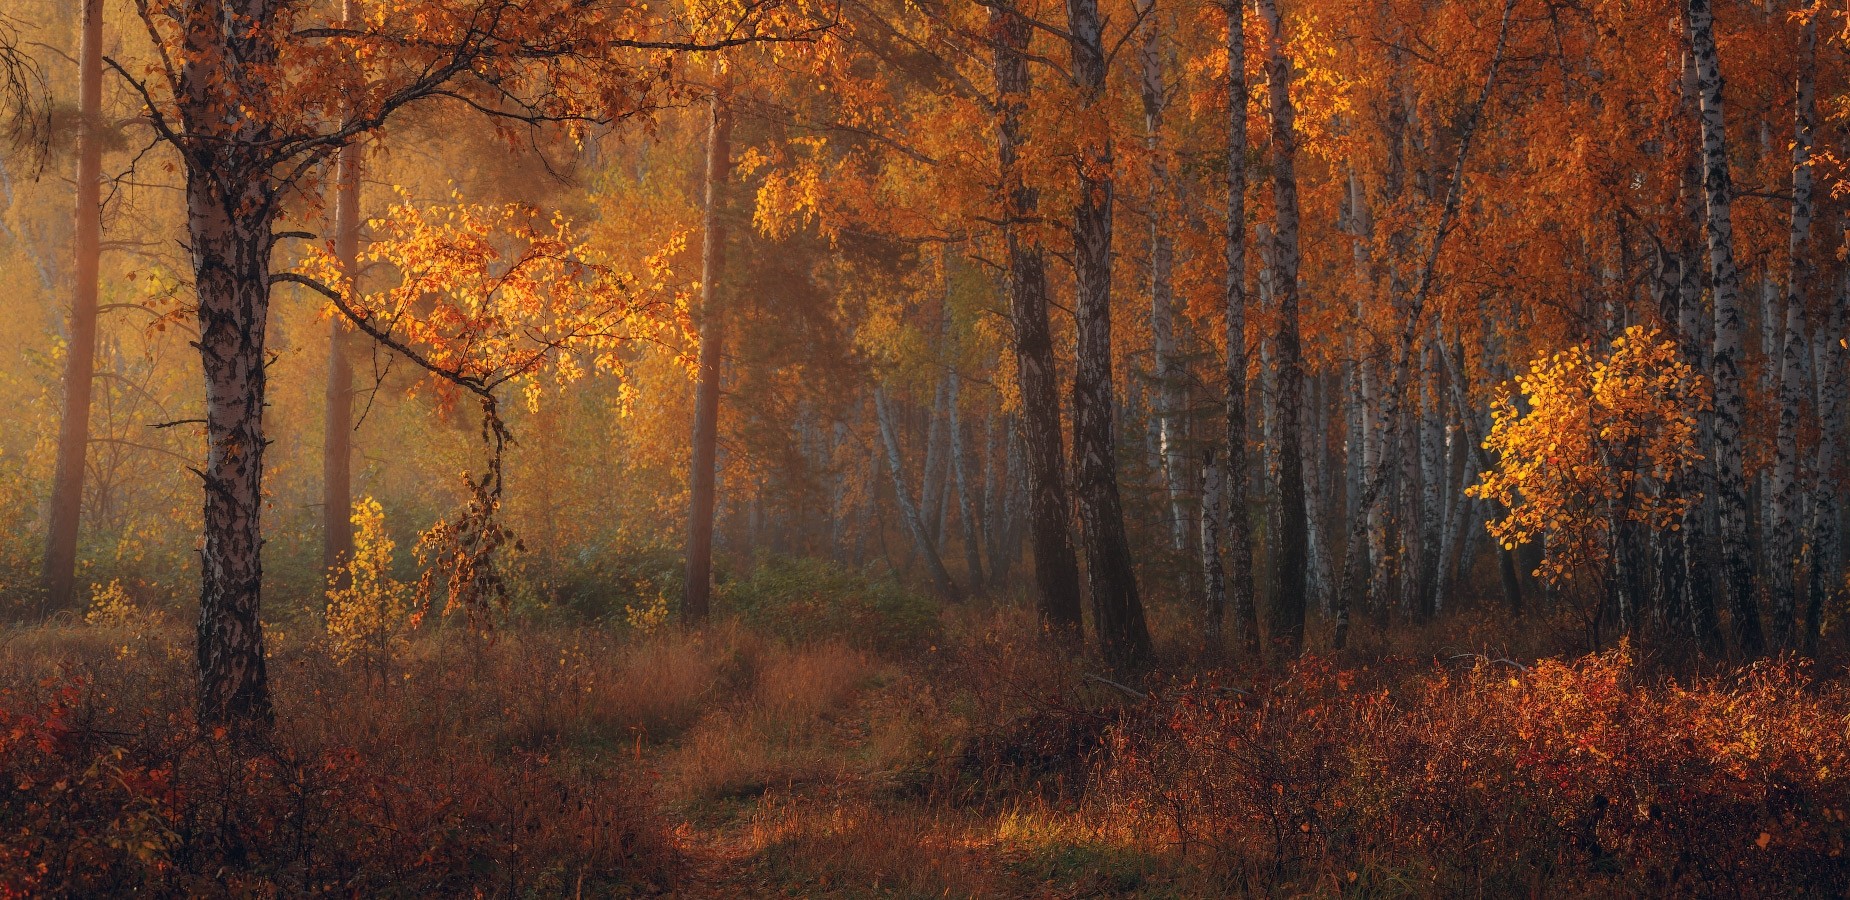 General 1850x900 nature fall forest amber leaves trees morning sunlight shrubs